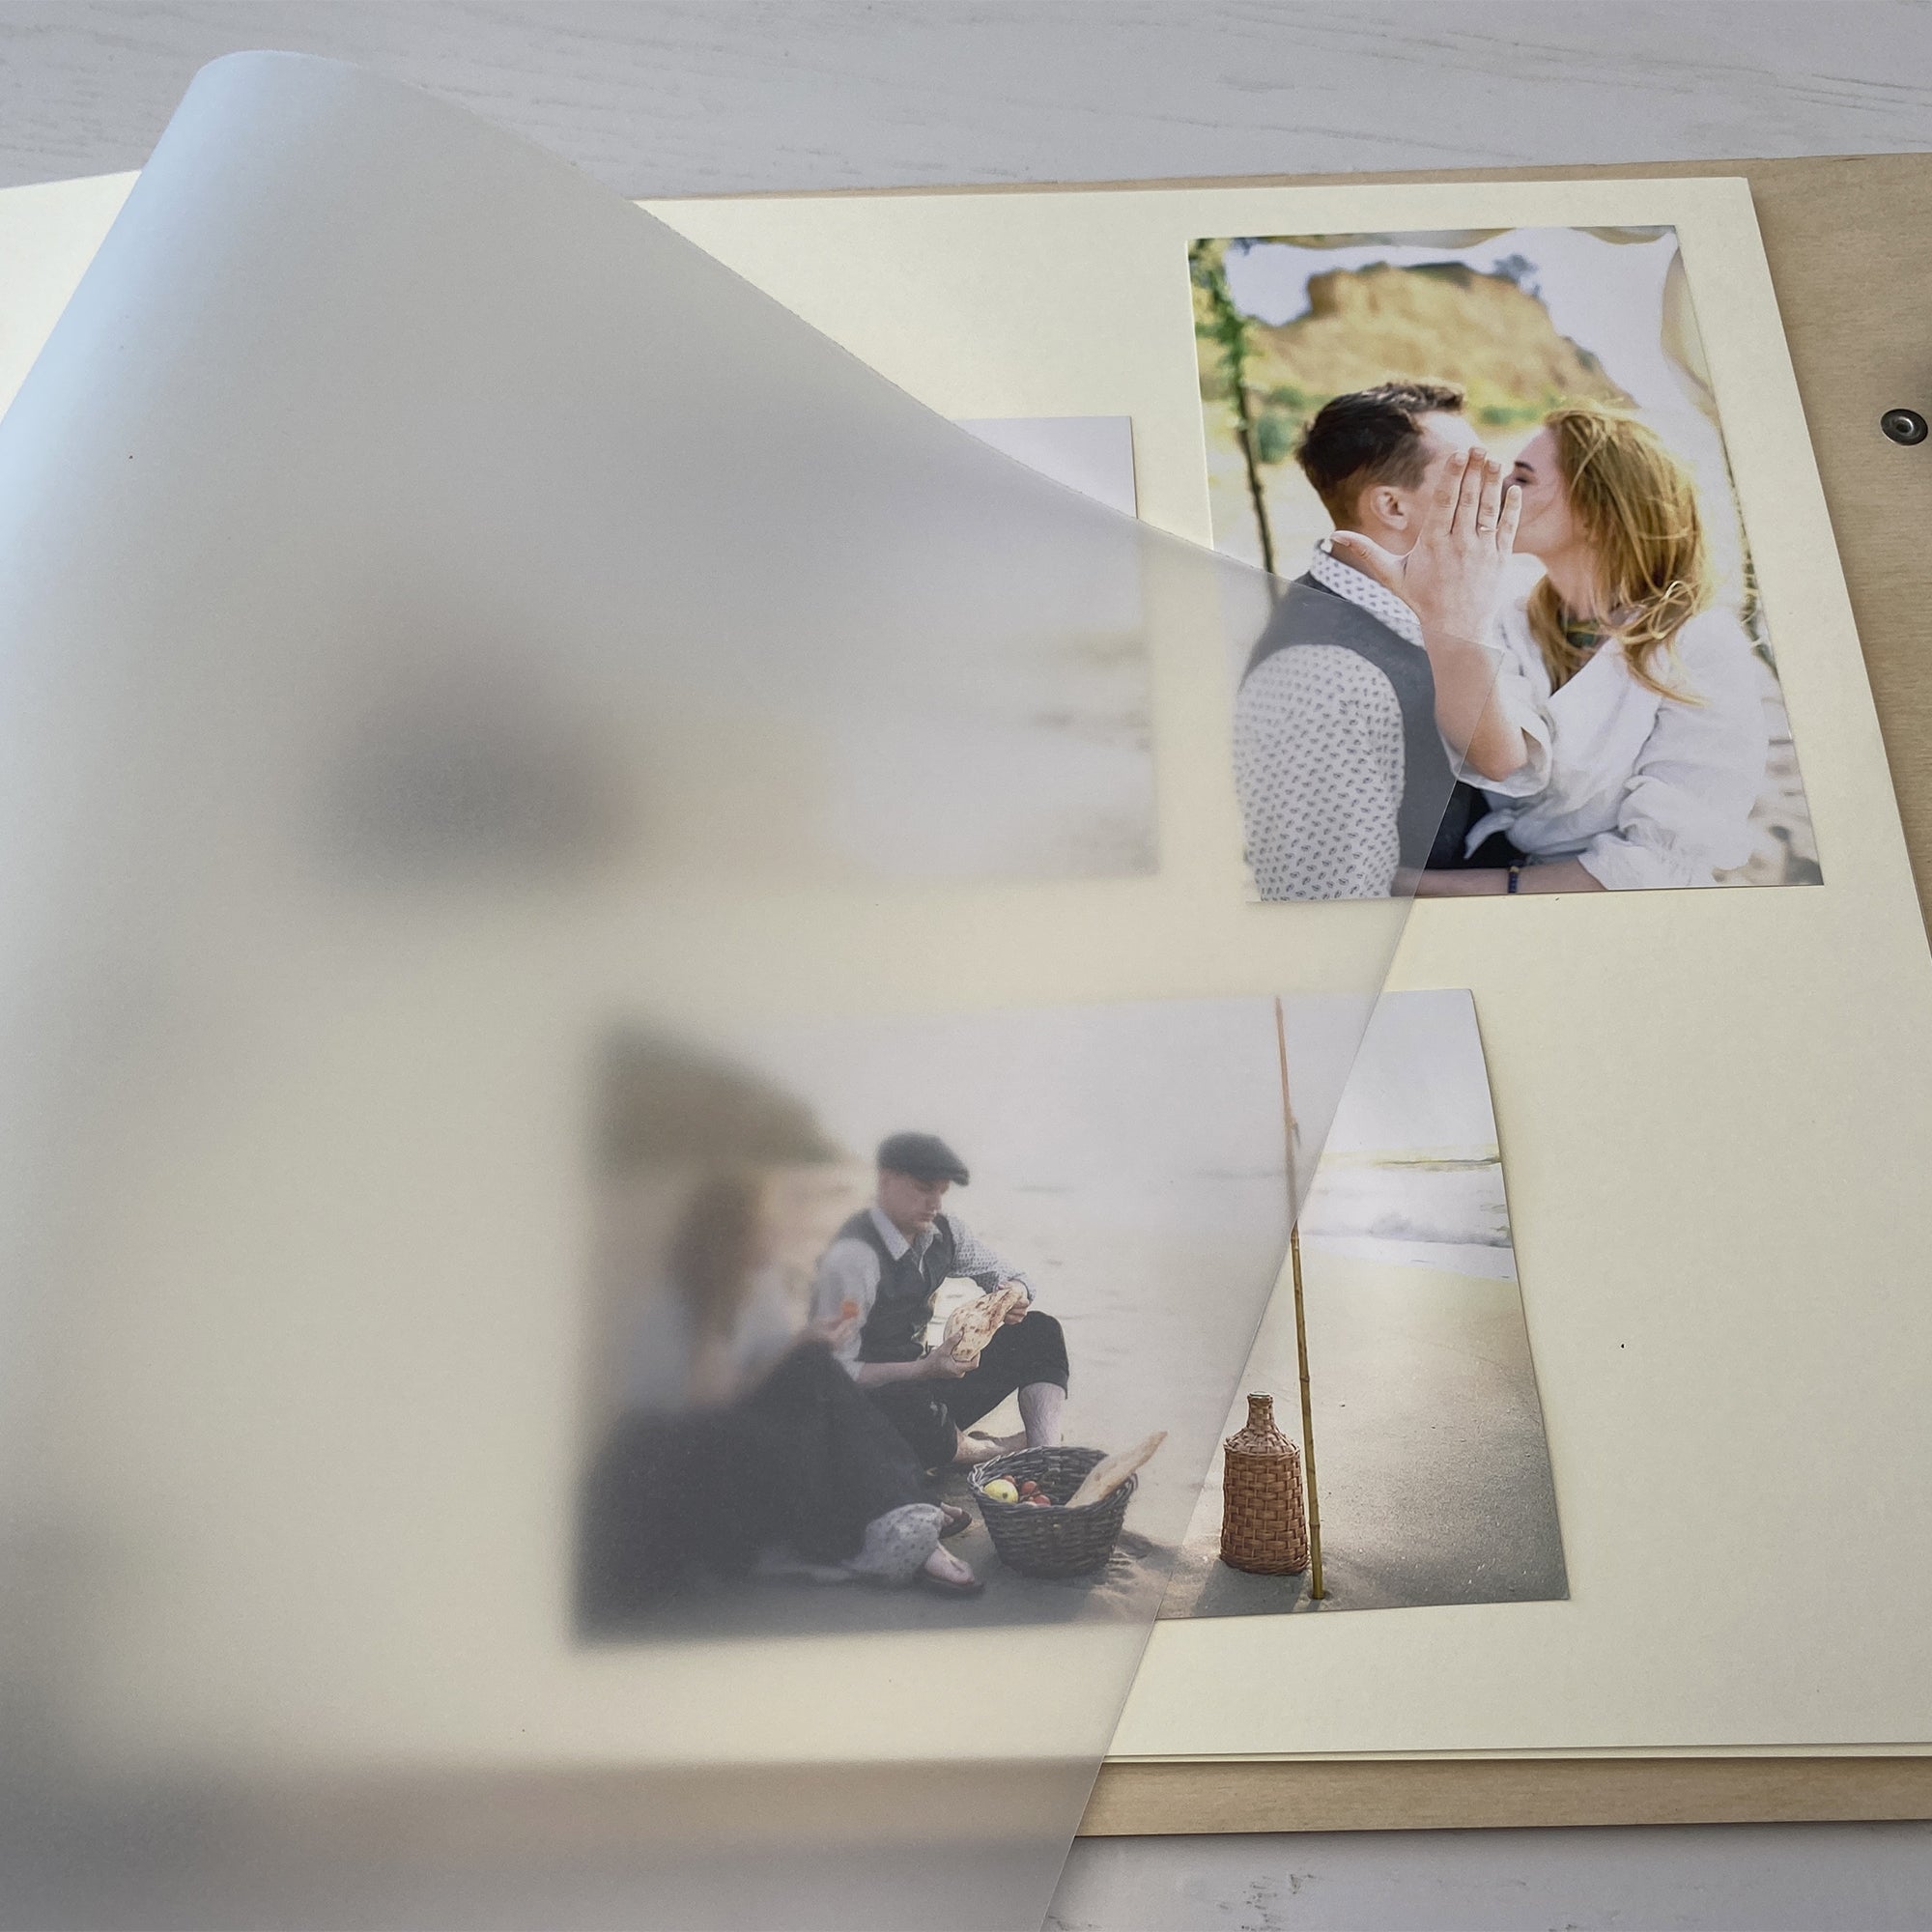 Personalized photo album with leather cover and Wedding day engraving